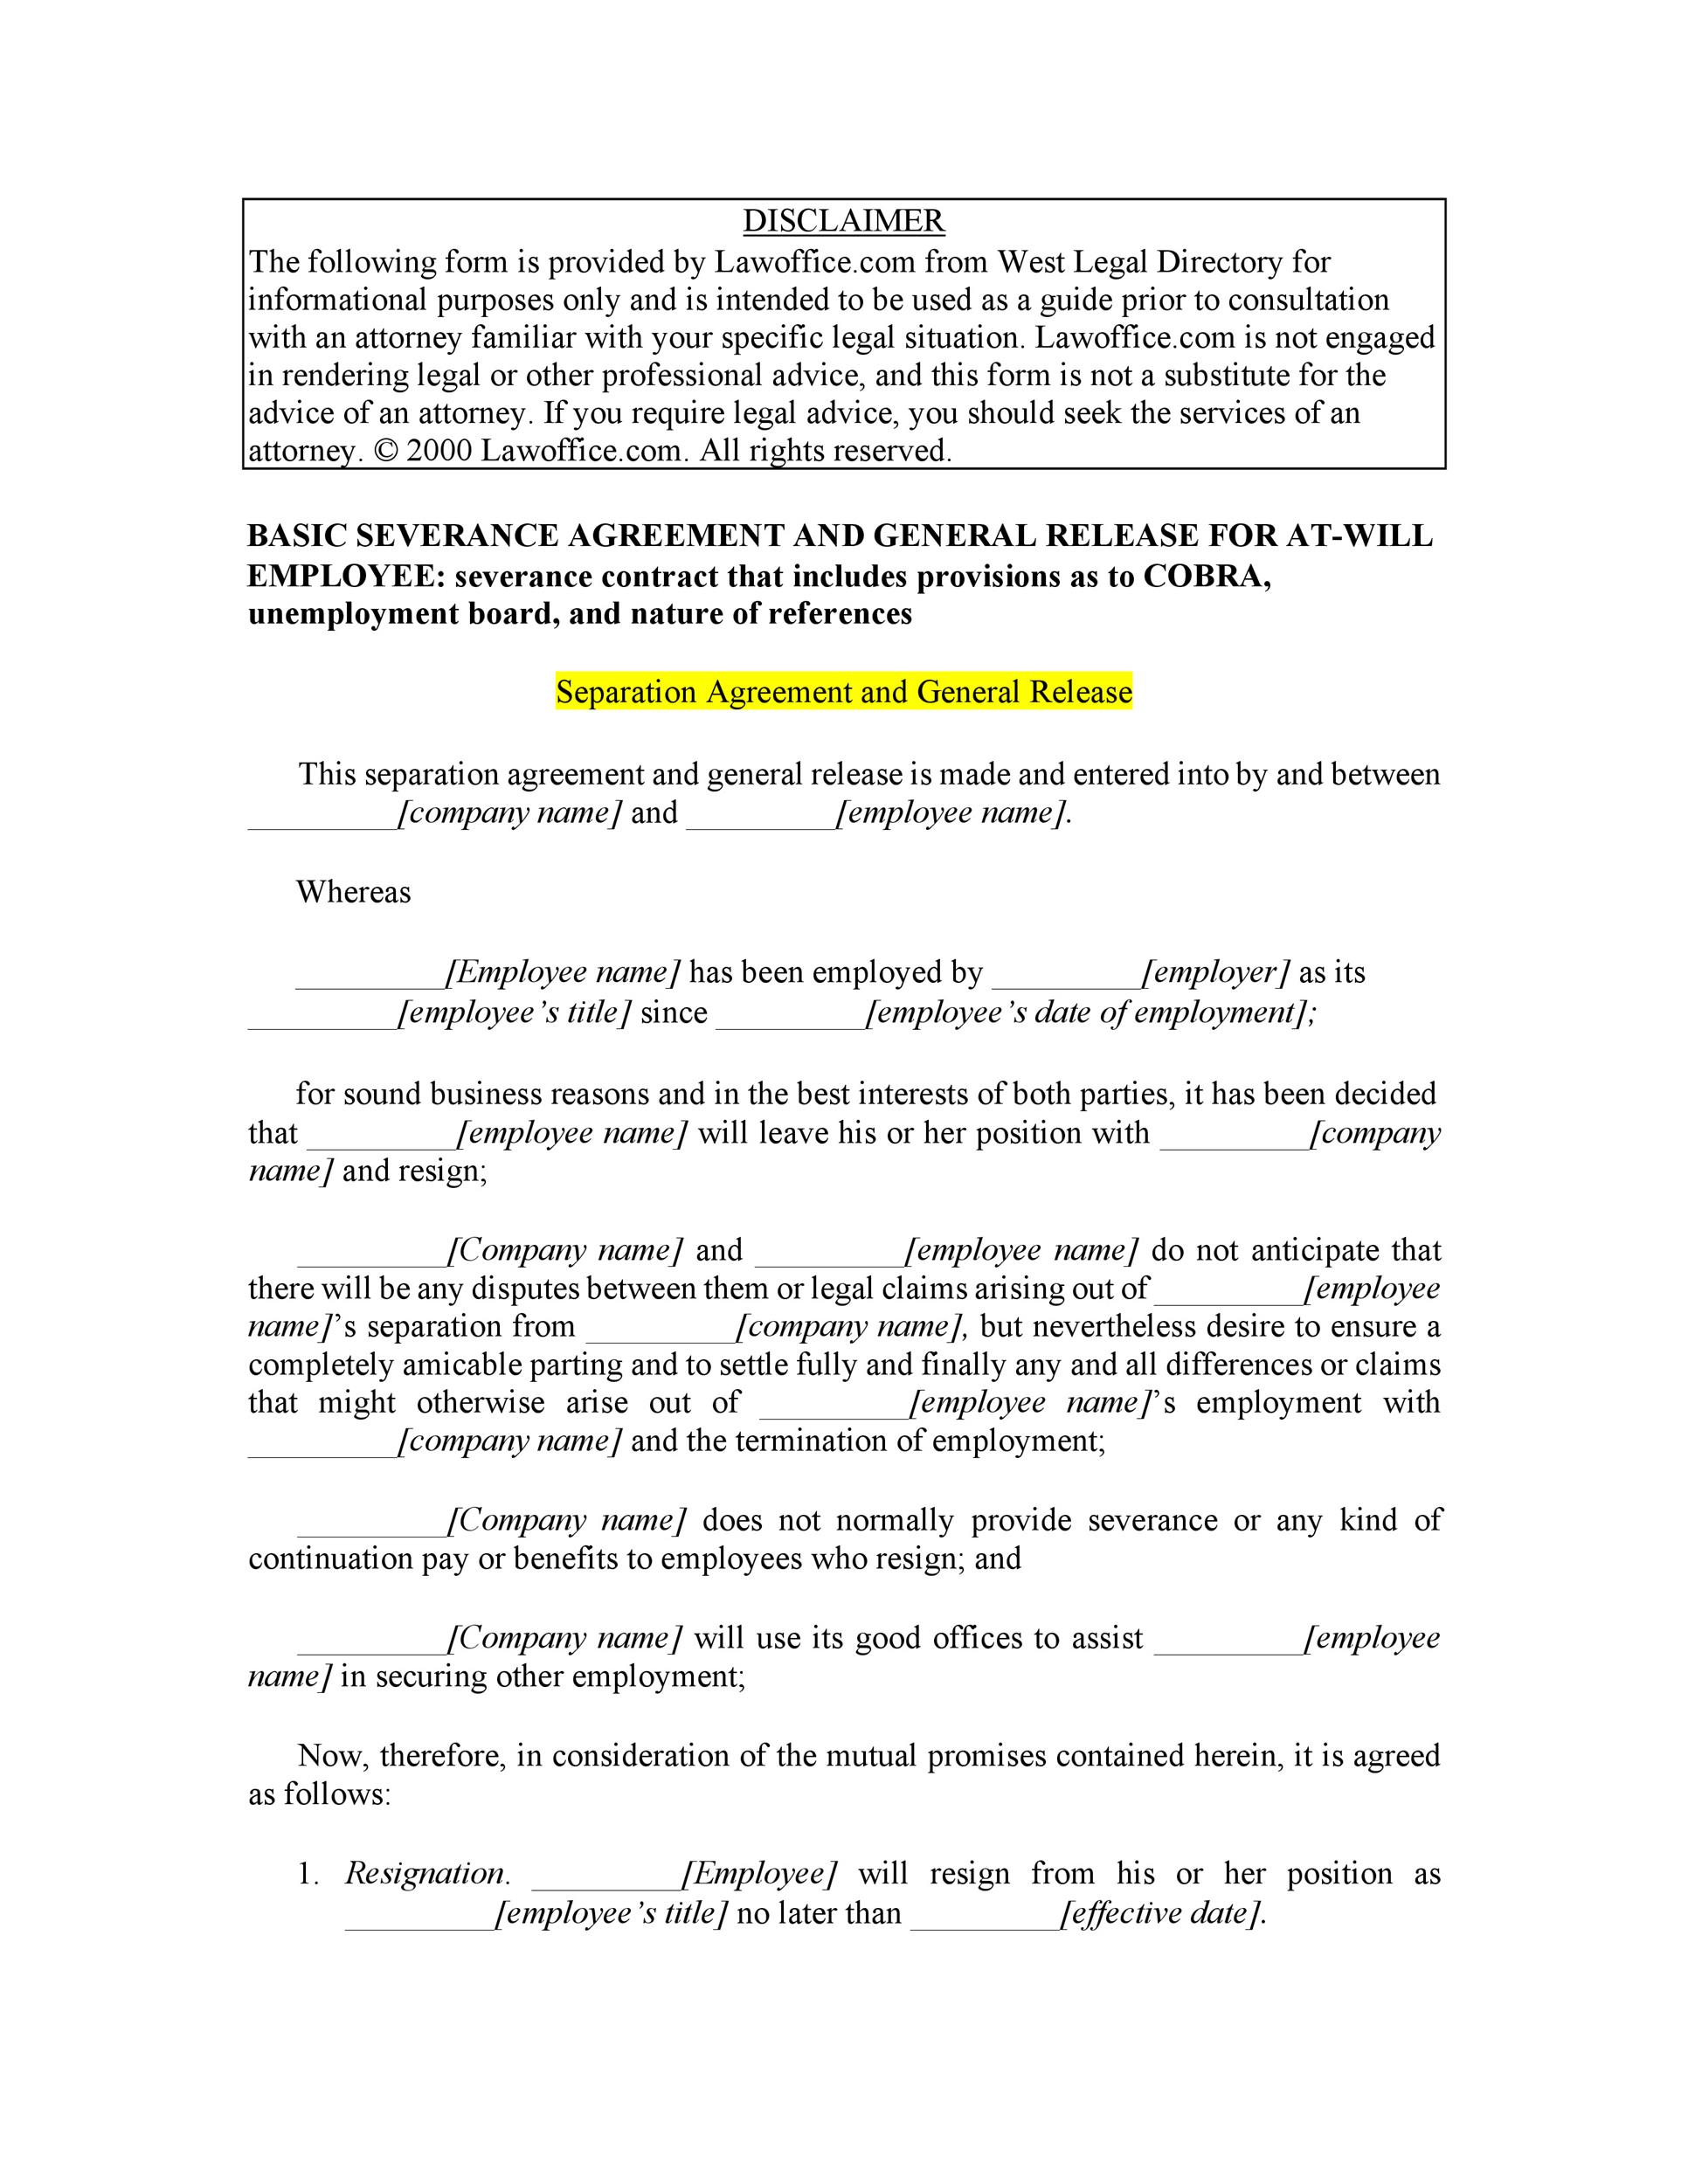 43-official-separation-agreement-templates-letters-forms-templatelab